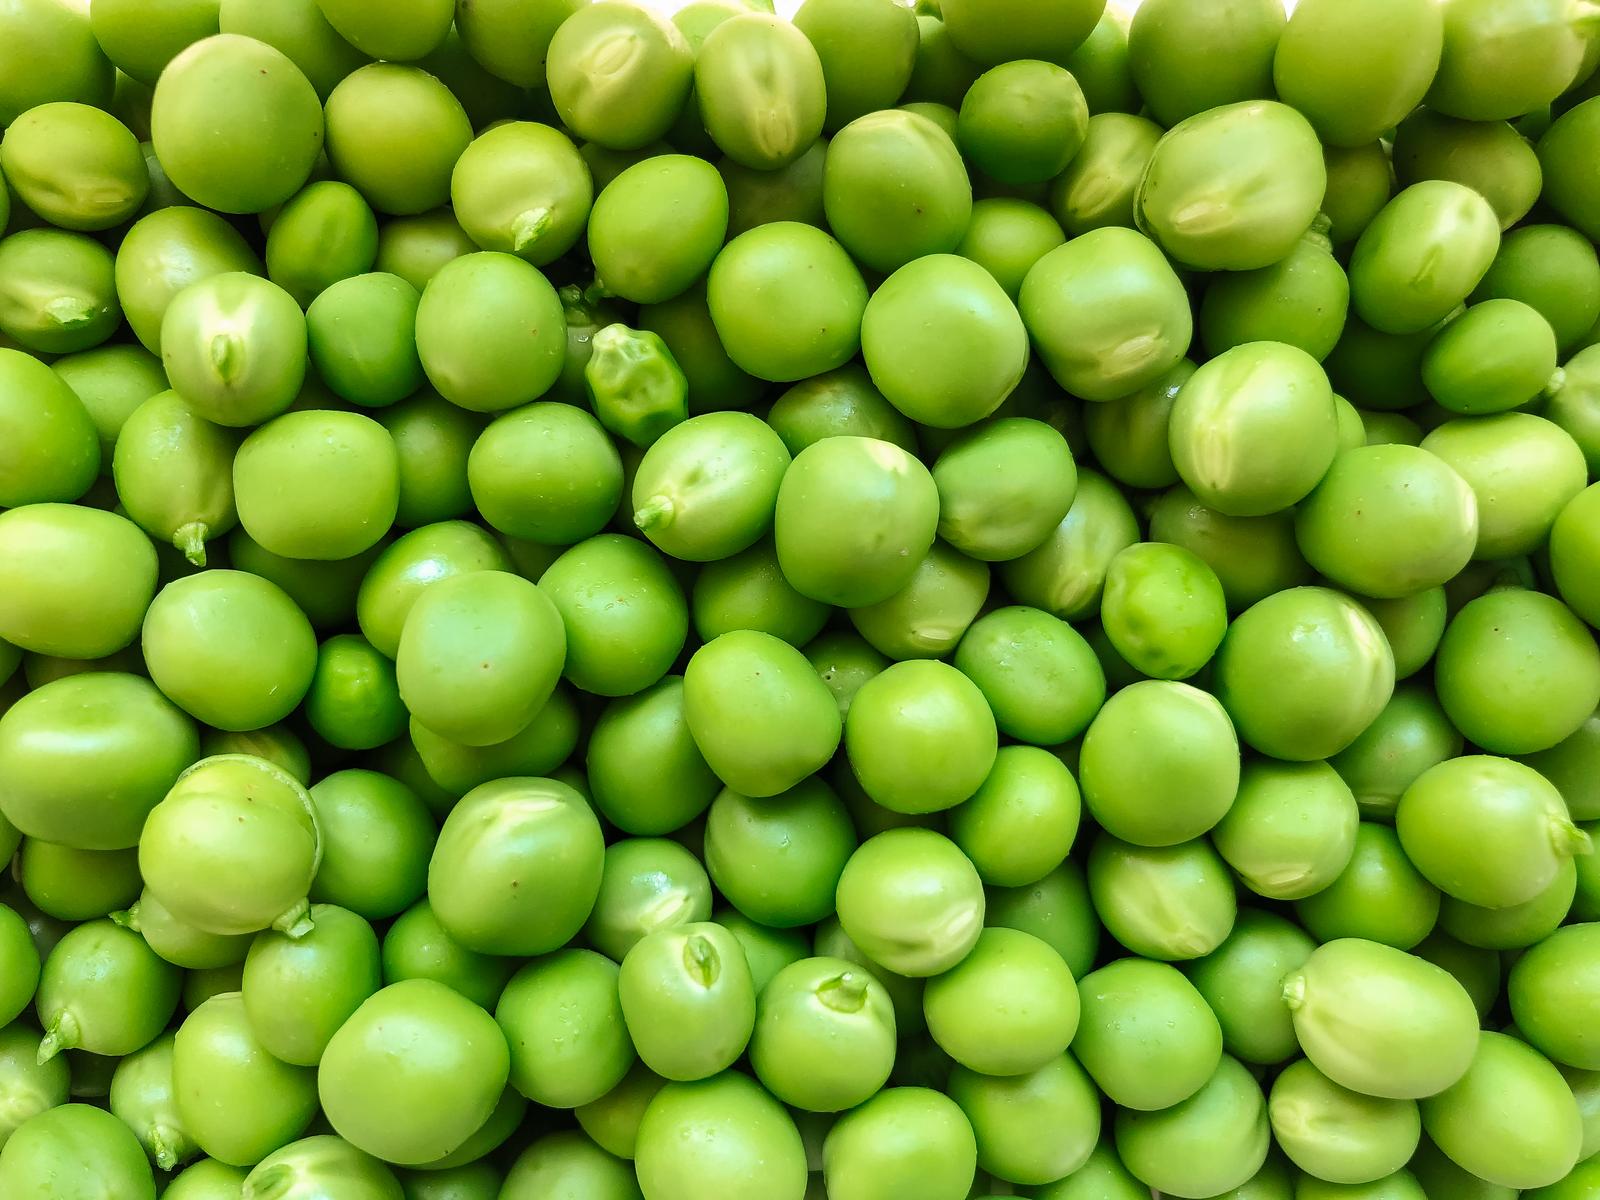 All-Rounded Knowledge Test Peas